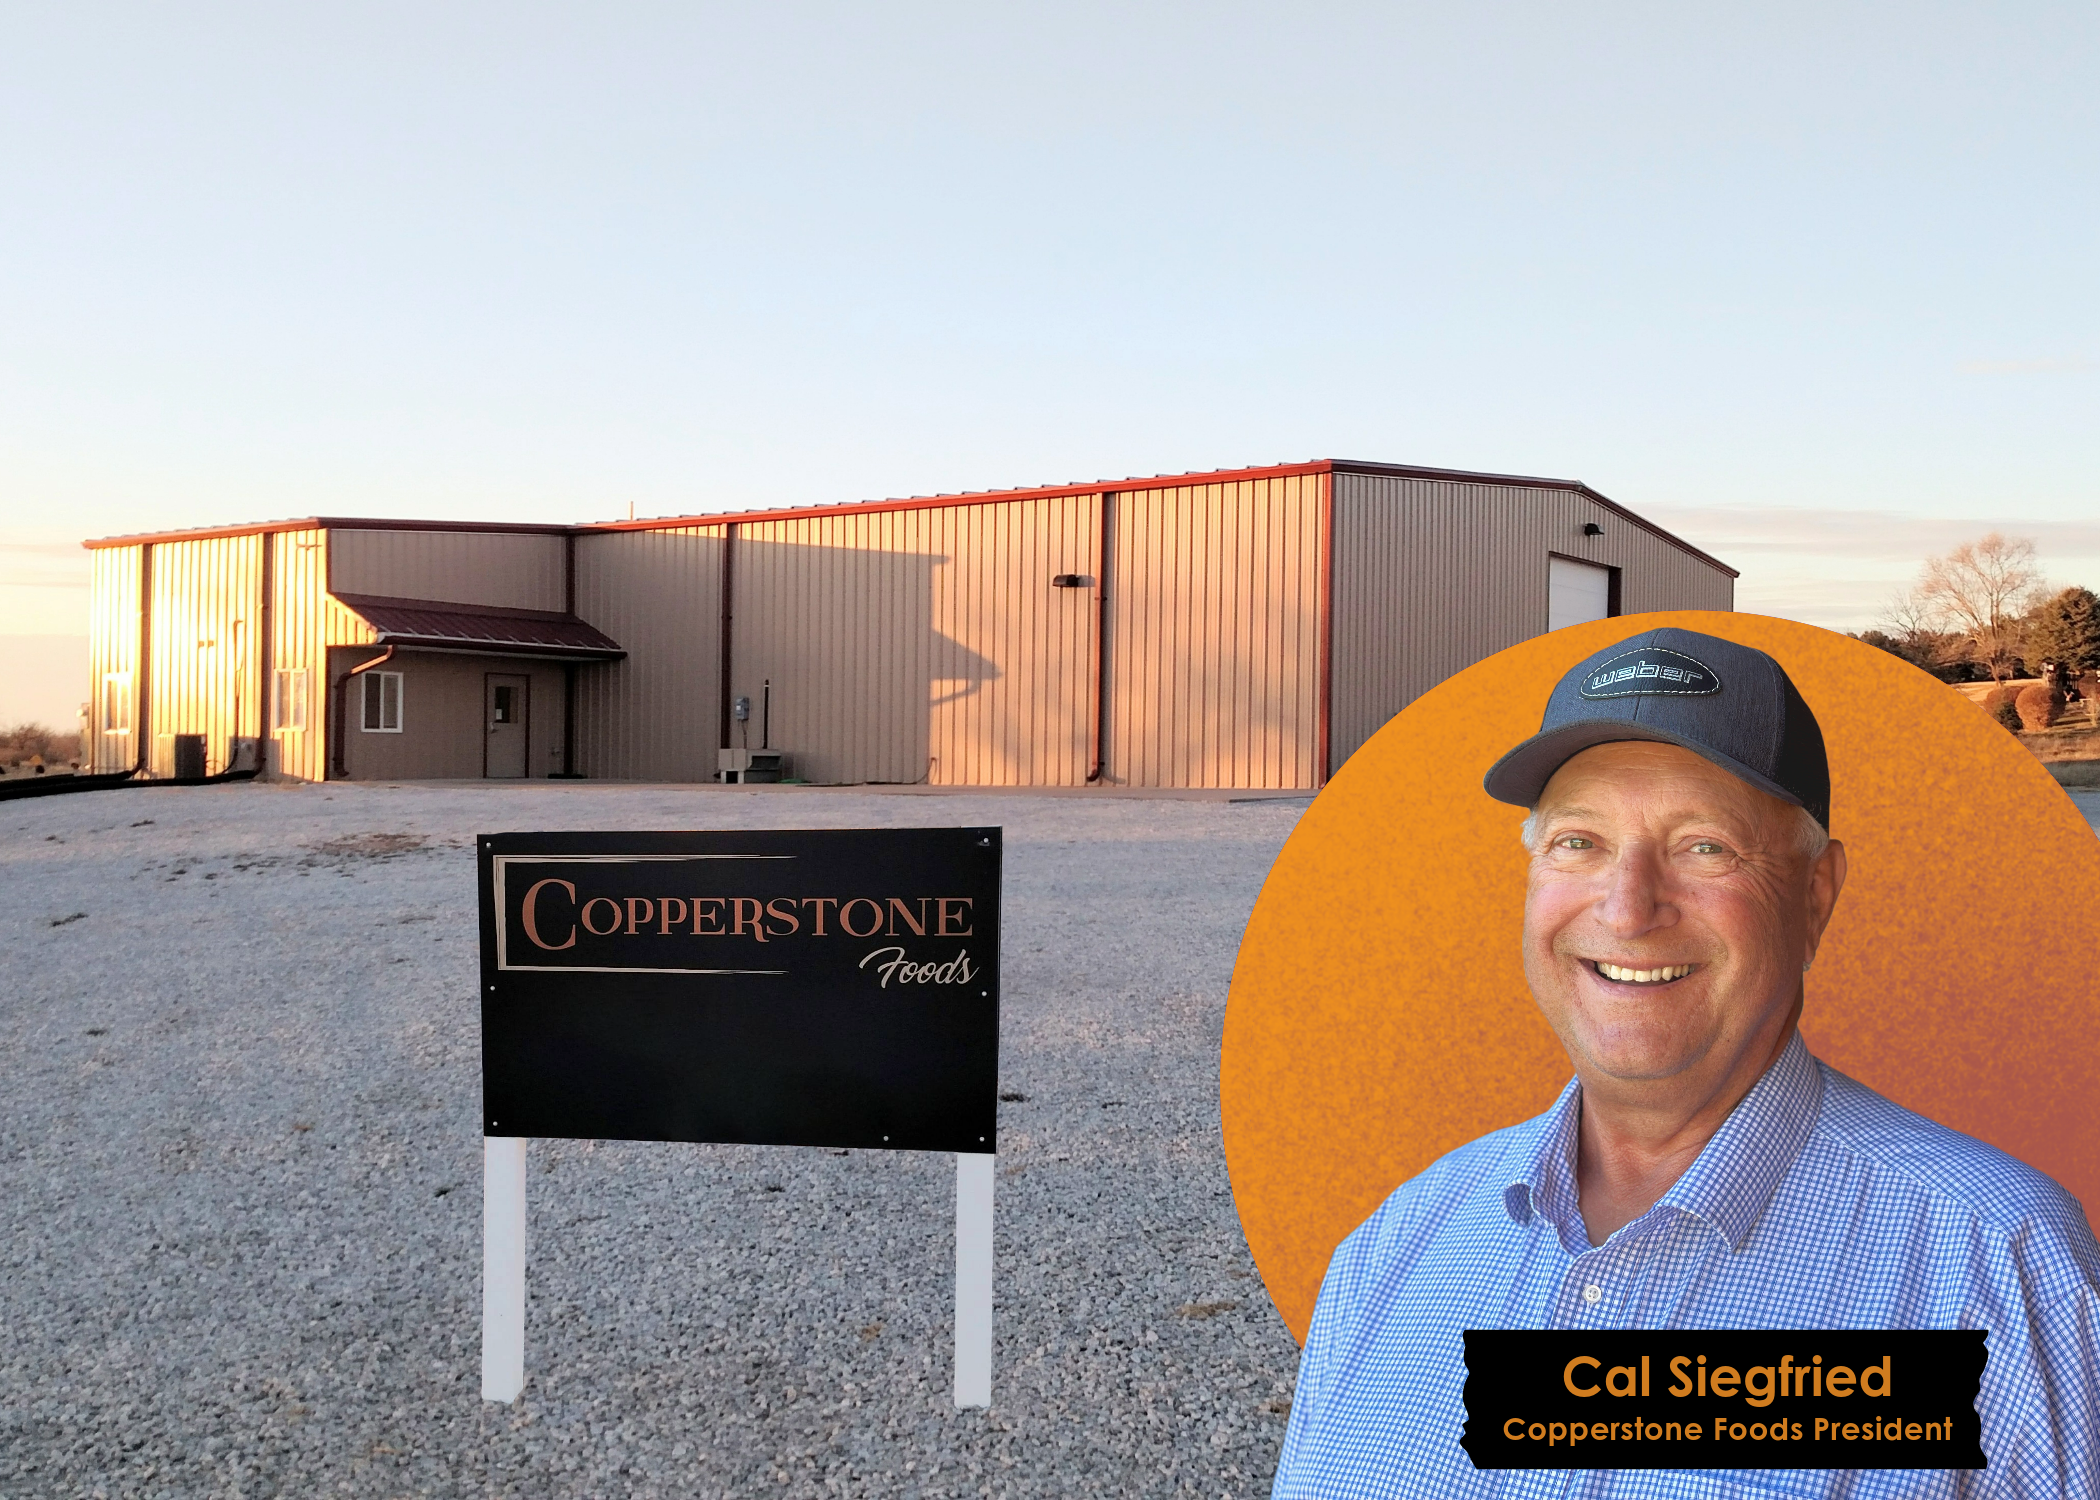 Cal Siegfried, Copperstone Foods President